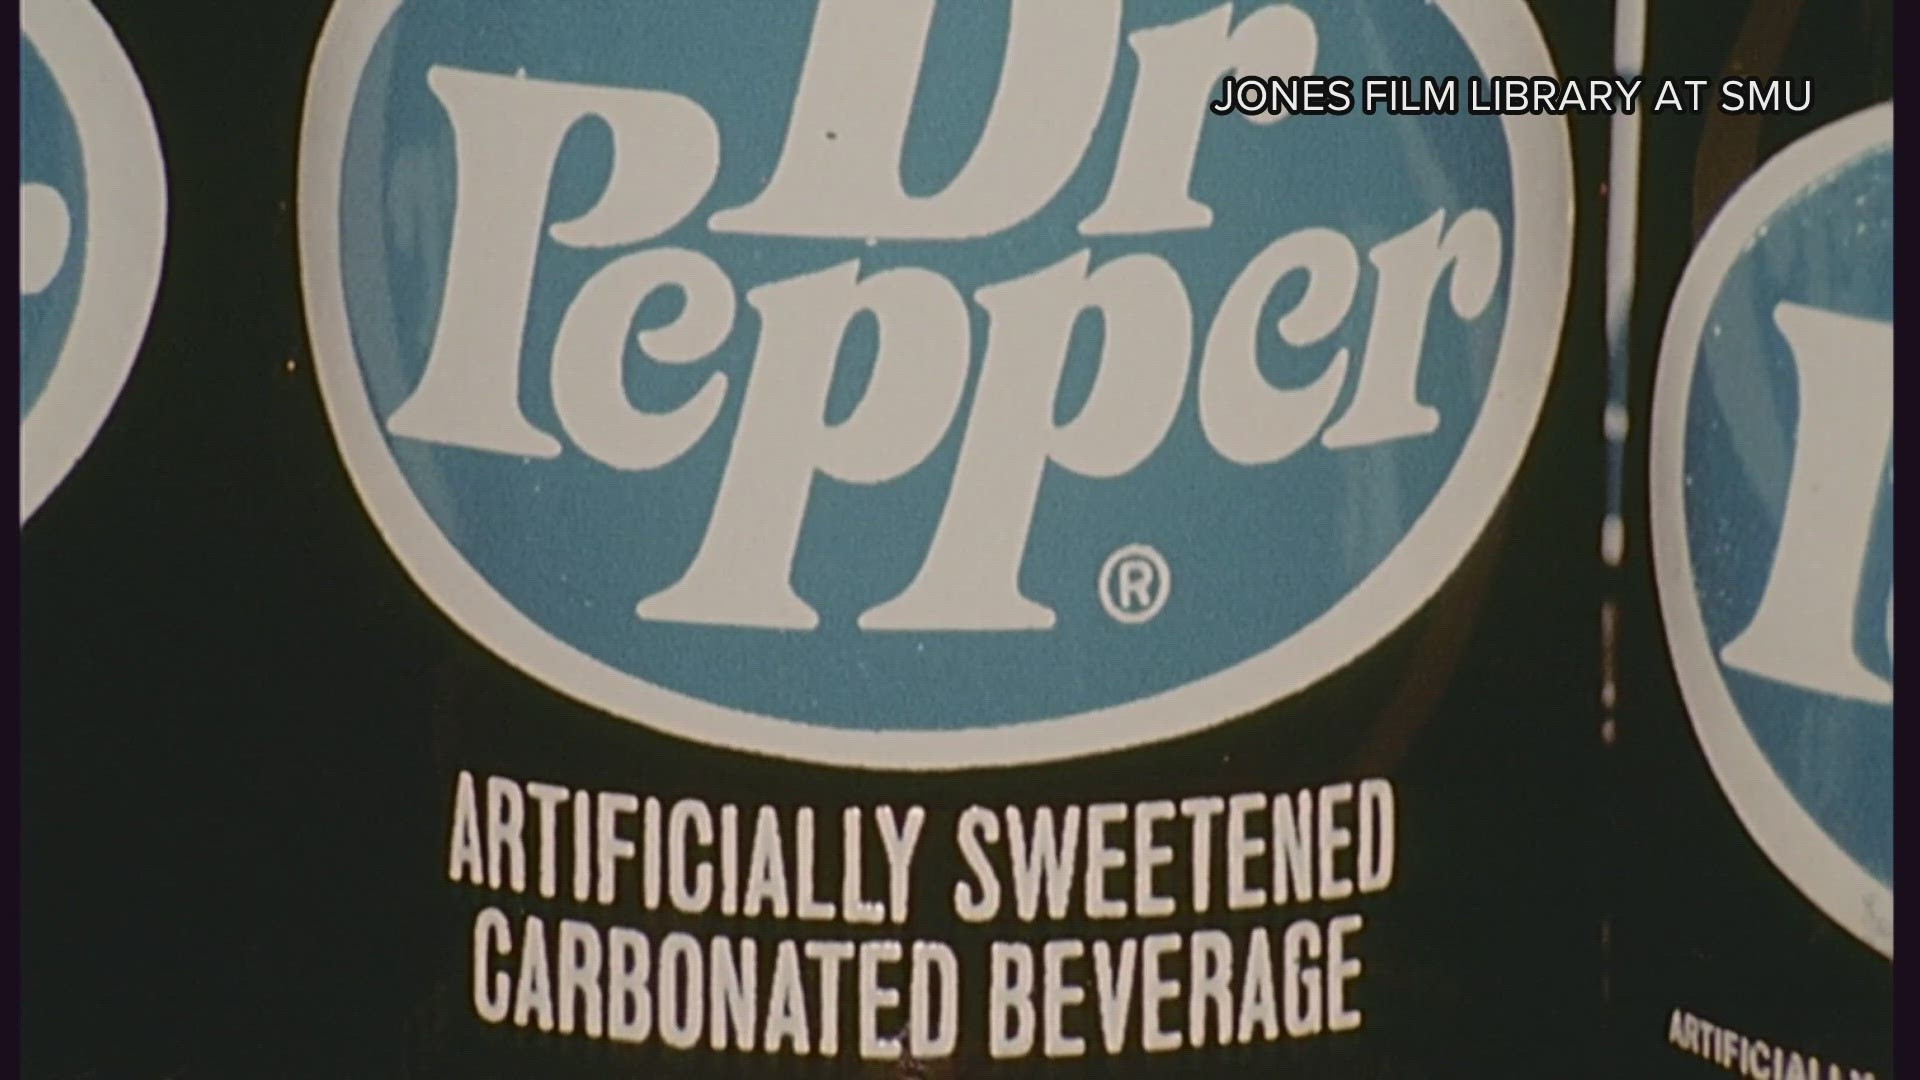 Dr. Pepper's old headquarters was a Dallas landmark, giving North Texas a front row to a heated soda feud.